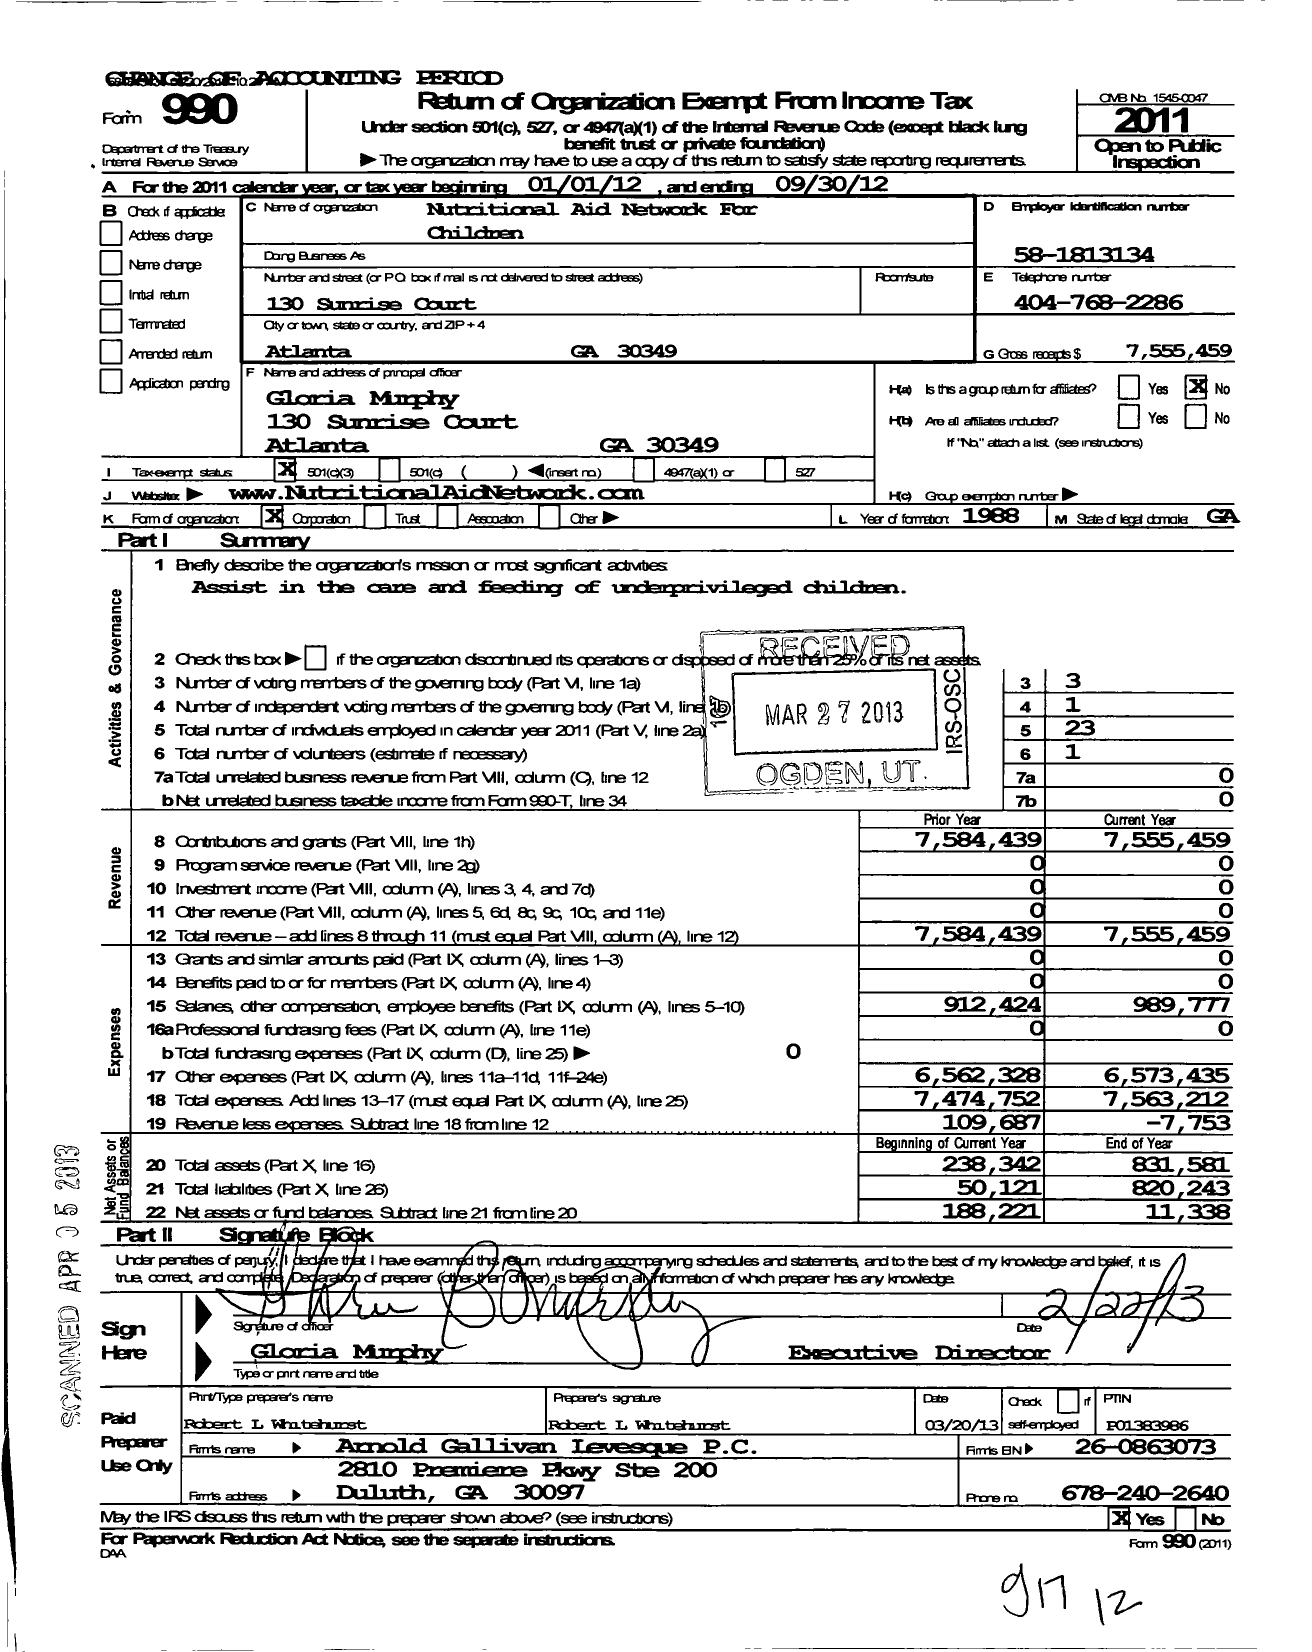 Image of first page of 2011 Form 990 for Nutritional Aid Network for Children